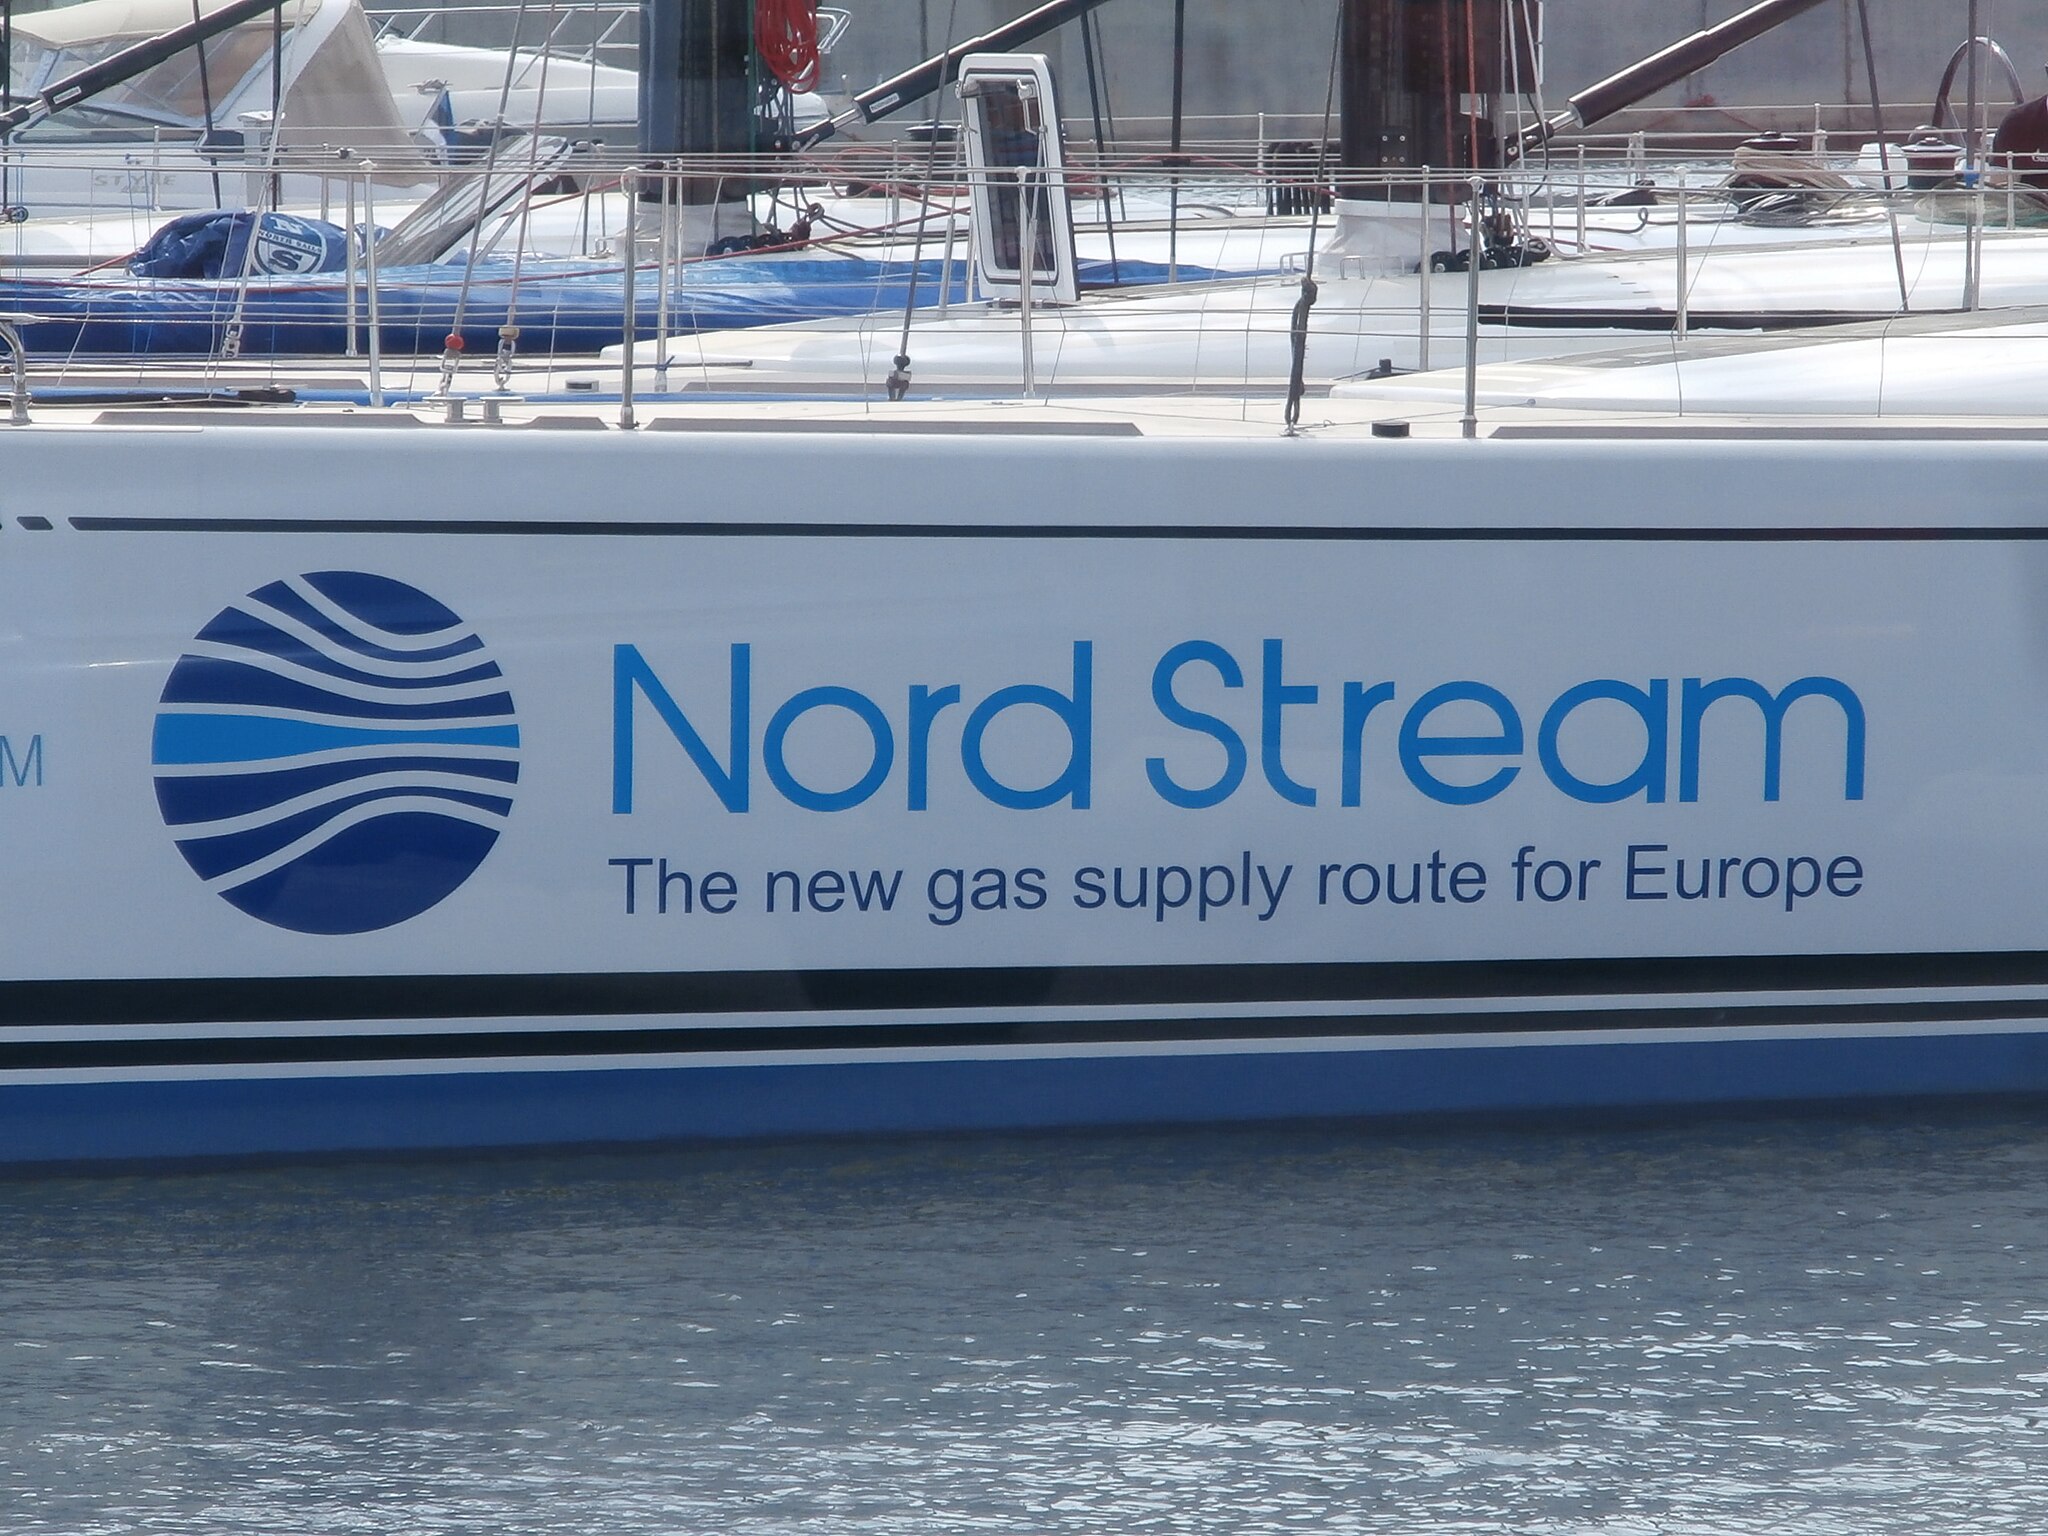 ‘Spirit of Europe’ vessel with marketing for the Nord Stream 1 pipeline, designed to transport natural gas from Russia to Europe, on its side in Tallinn, 19 May 2014. © Pjotr Mahhonin via Wikipedia Commons